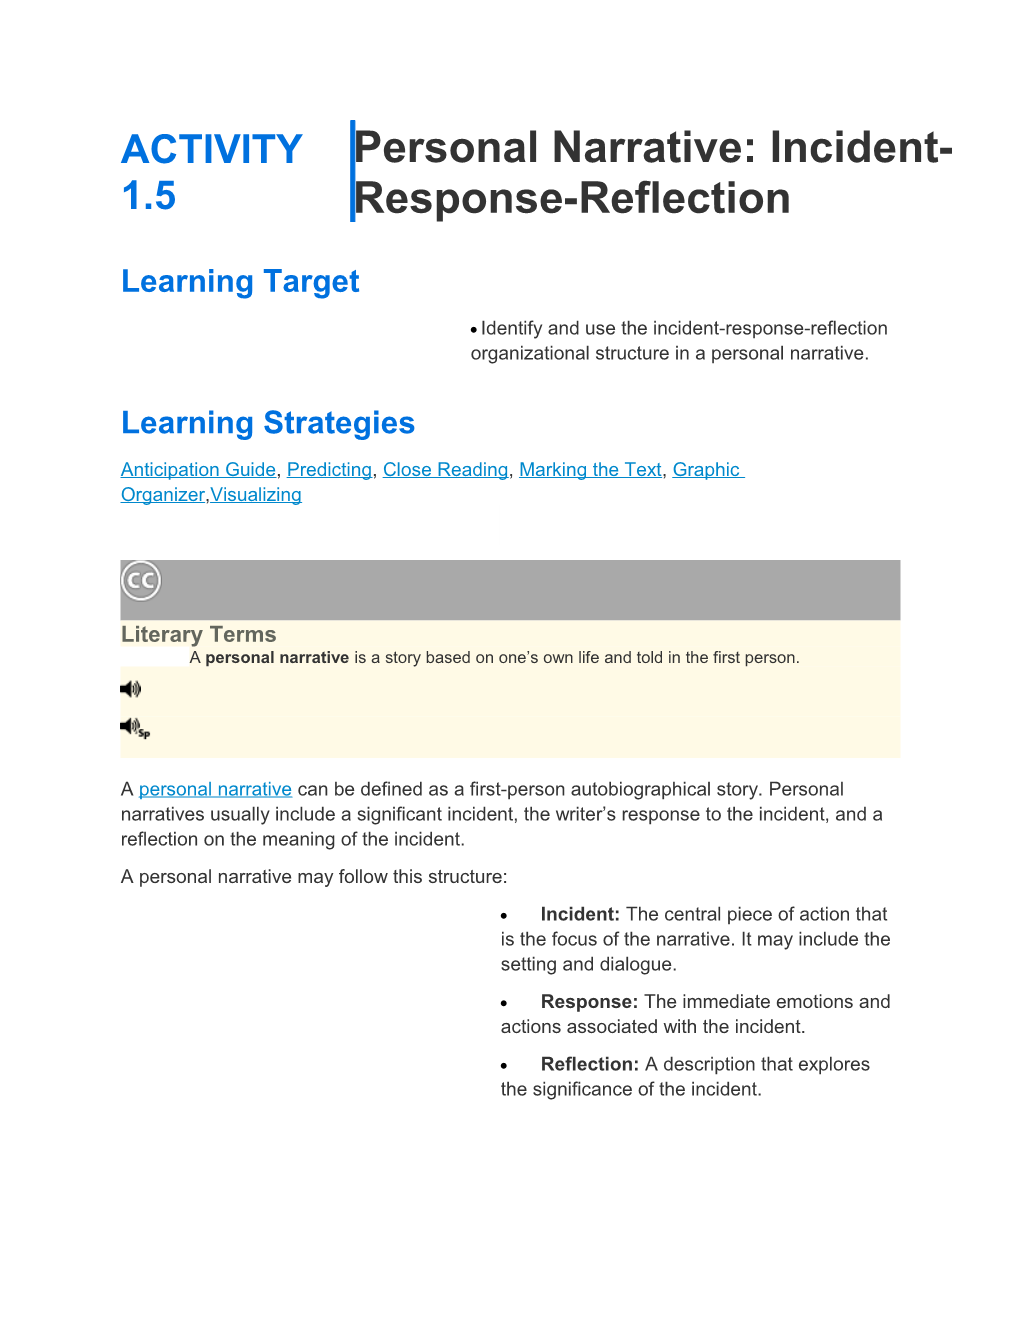 Identify and Use the Incident-Response-Reflection Organizational Structure in a Personal